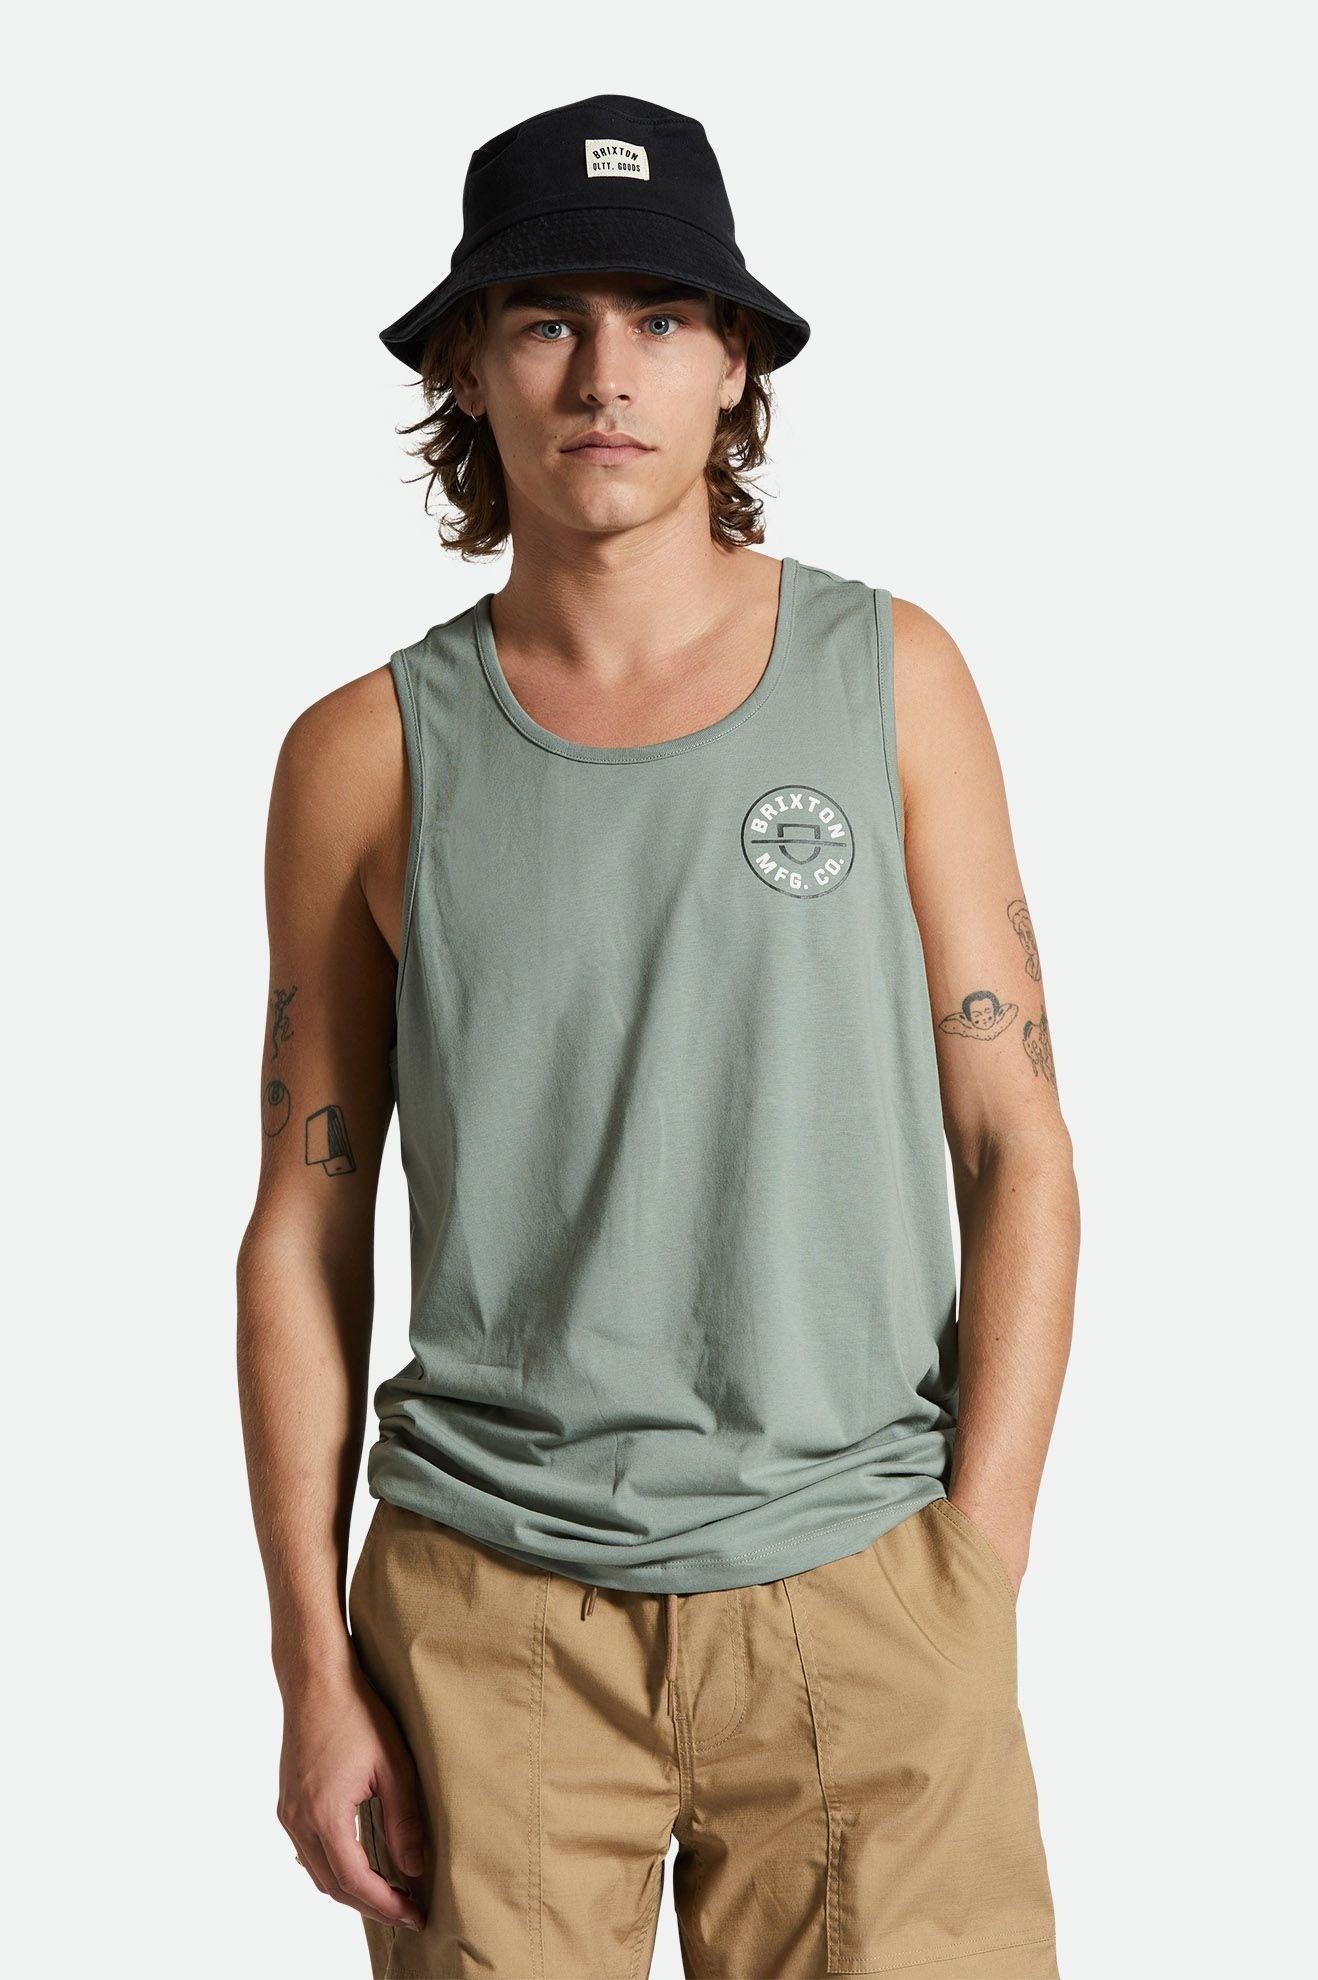 Men's Fit, Front View | Crest Tank Top - Chinois Green/White/Black